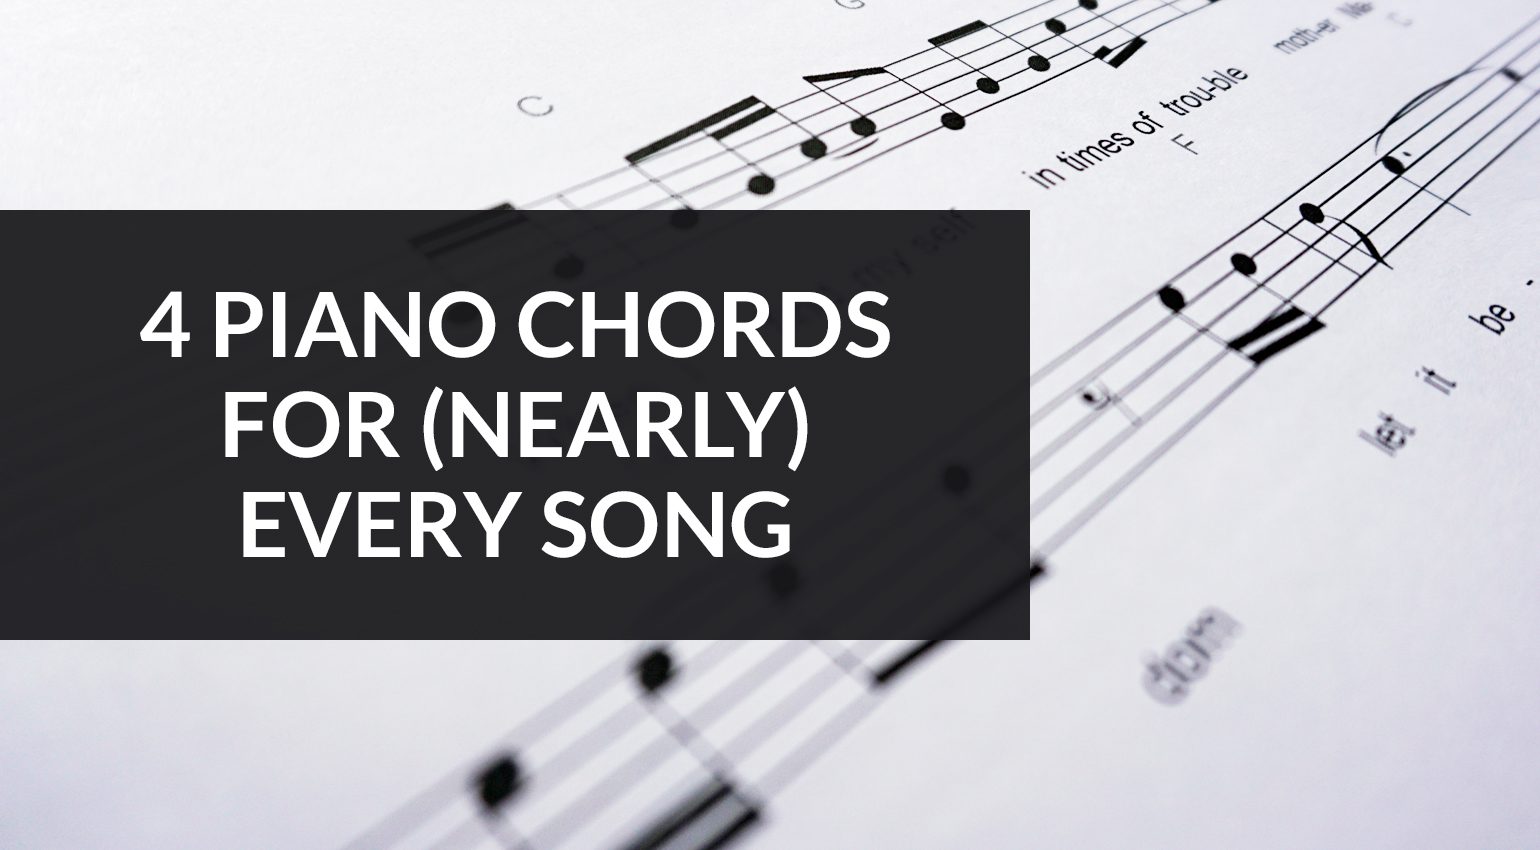 Four Piano Chords for (nearly) every Song